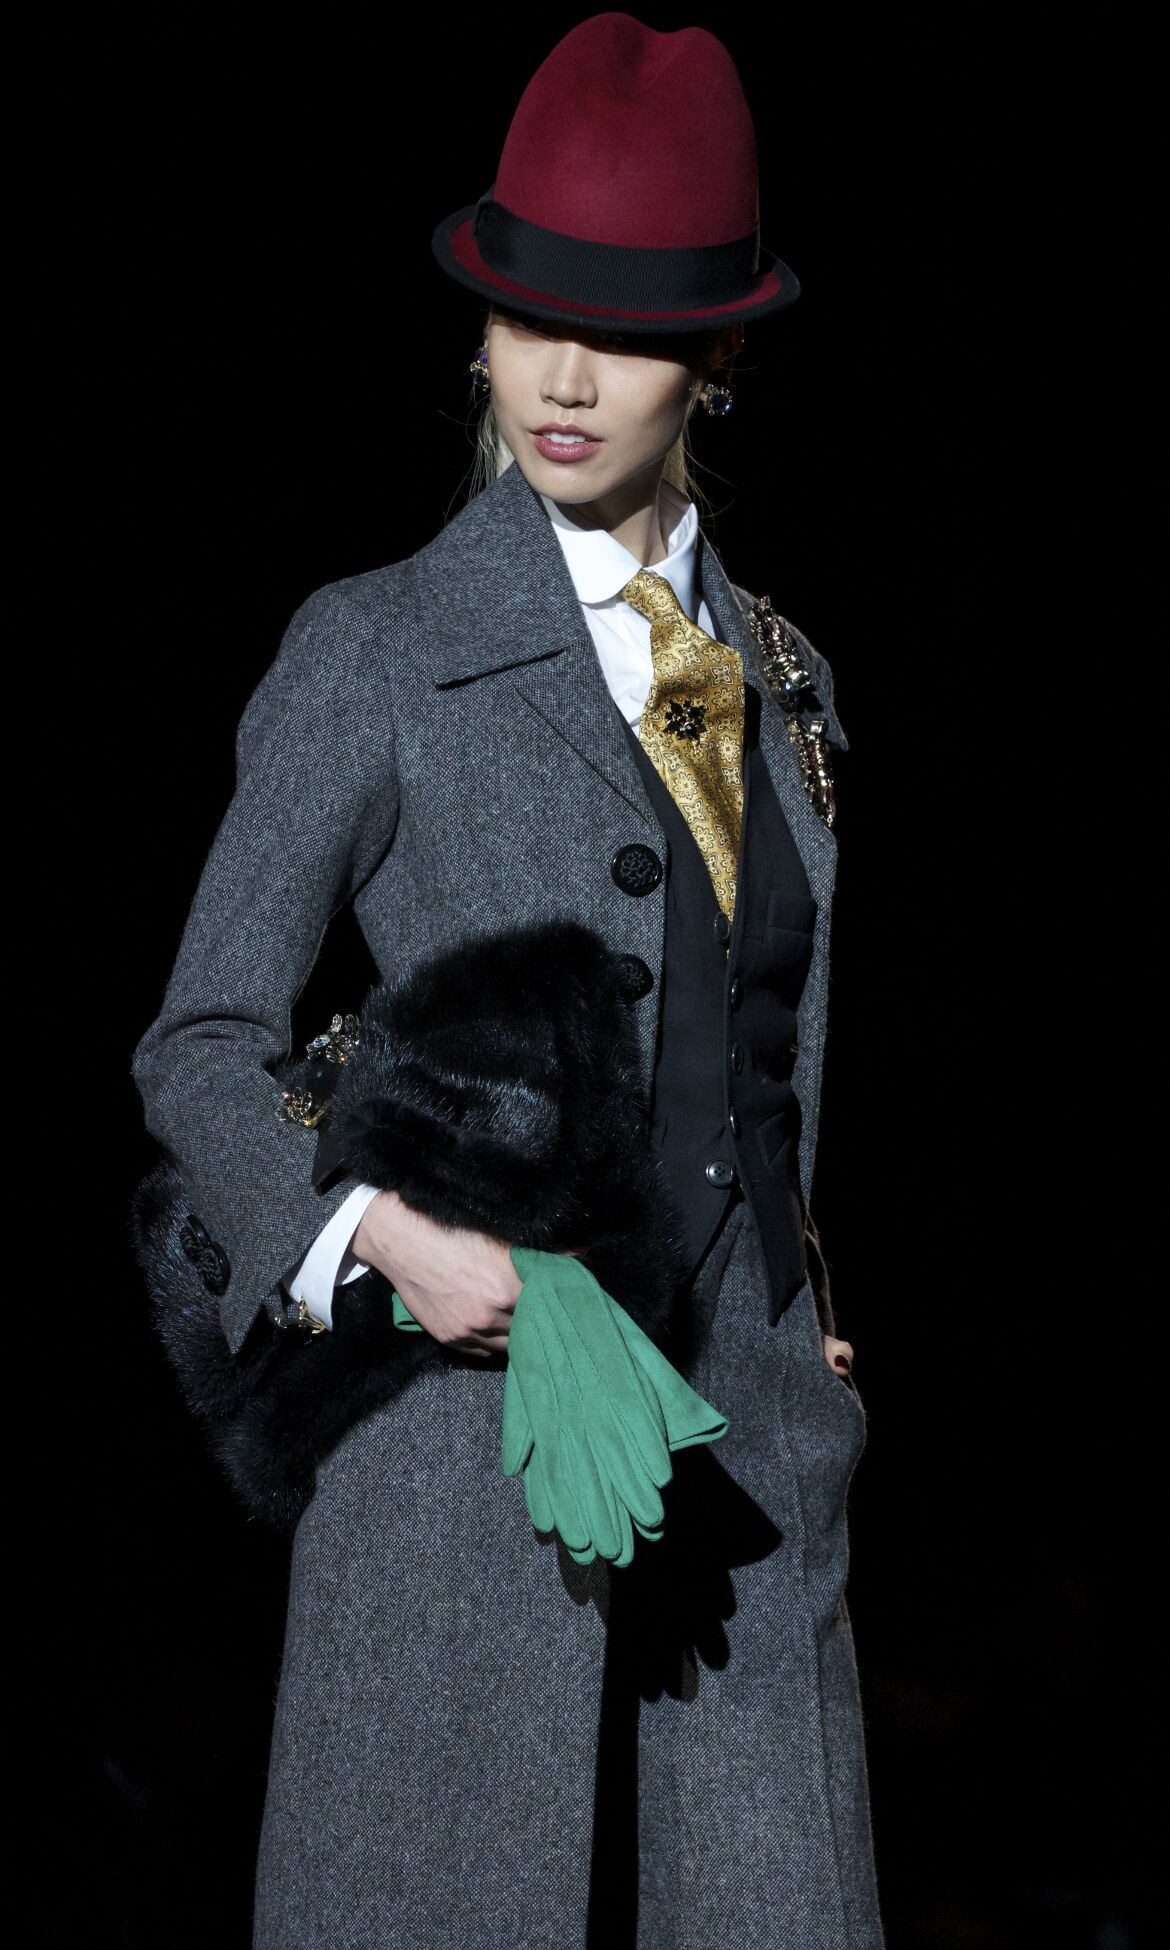 DSQUARED2 FALL WINTER 2013-14 WOMEN'S COLLECTION | The Skinny Beep